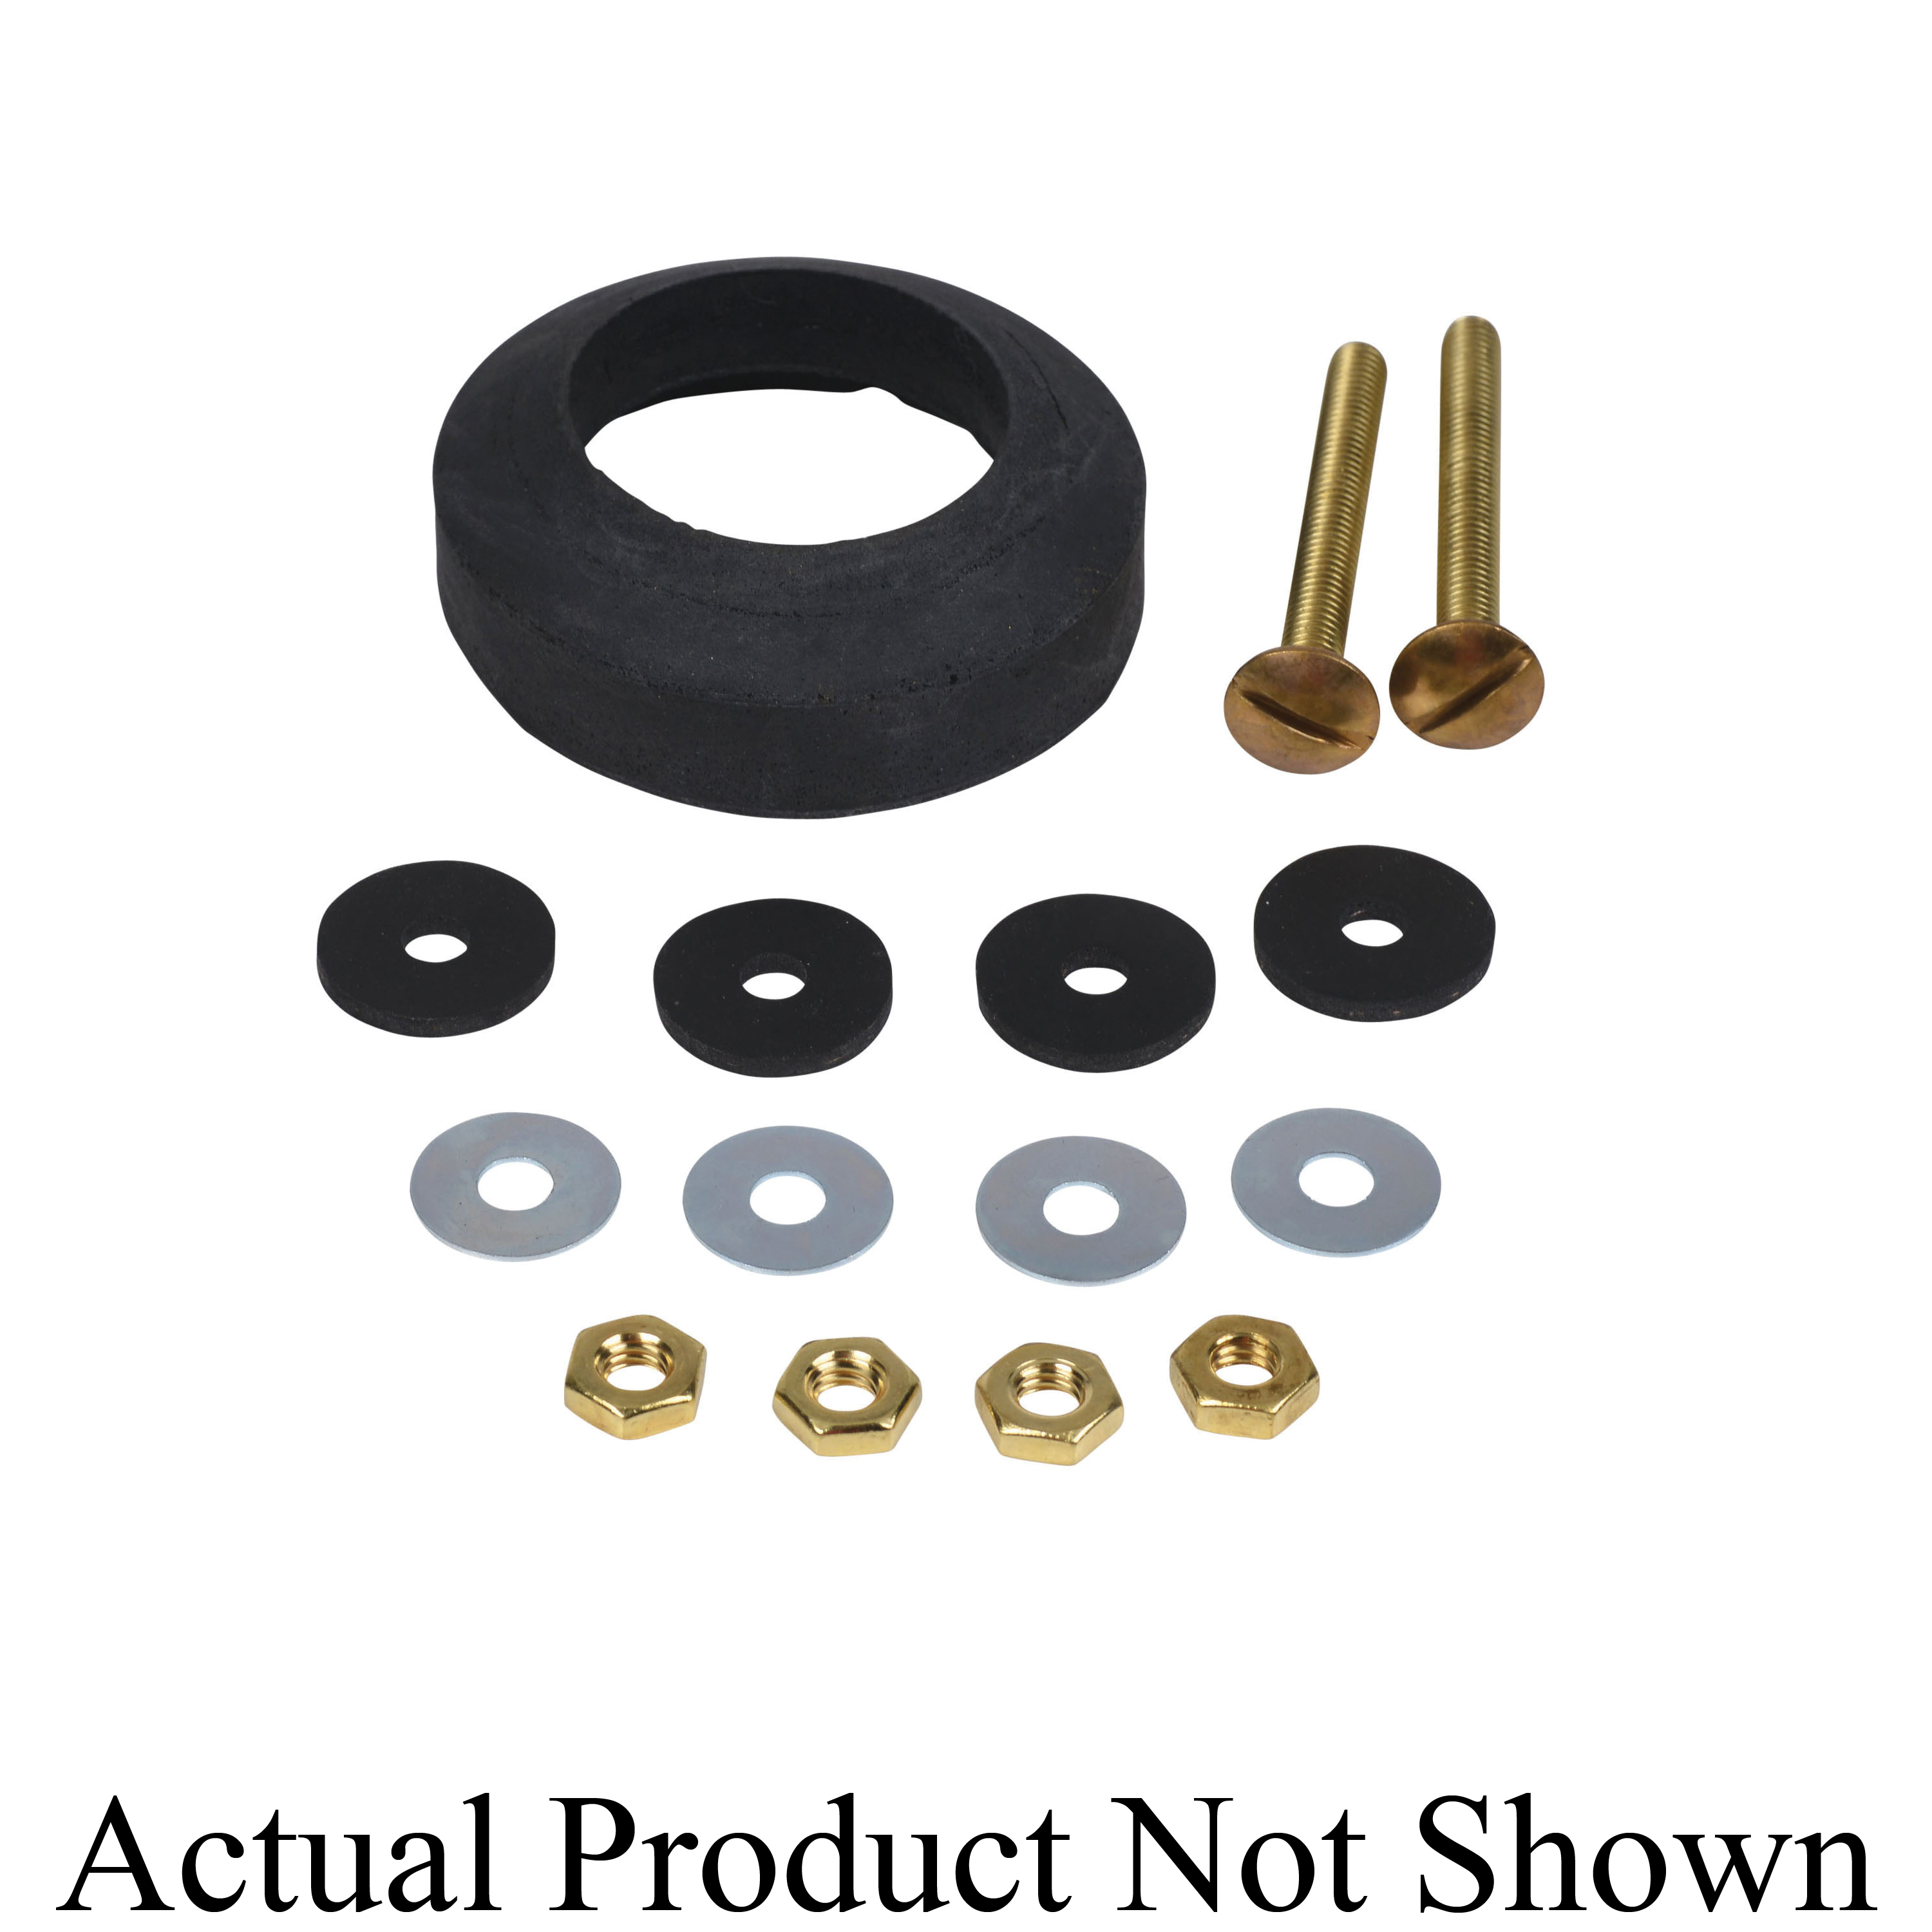 Harvey® 072035 Double Thick Tank-to-Bowl Gasket Kit With Hex Recess and Bolt Kit, For Use With 3 and 4 in Waste Lines, Sponge Rubber